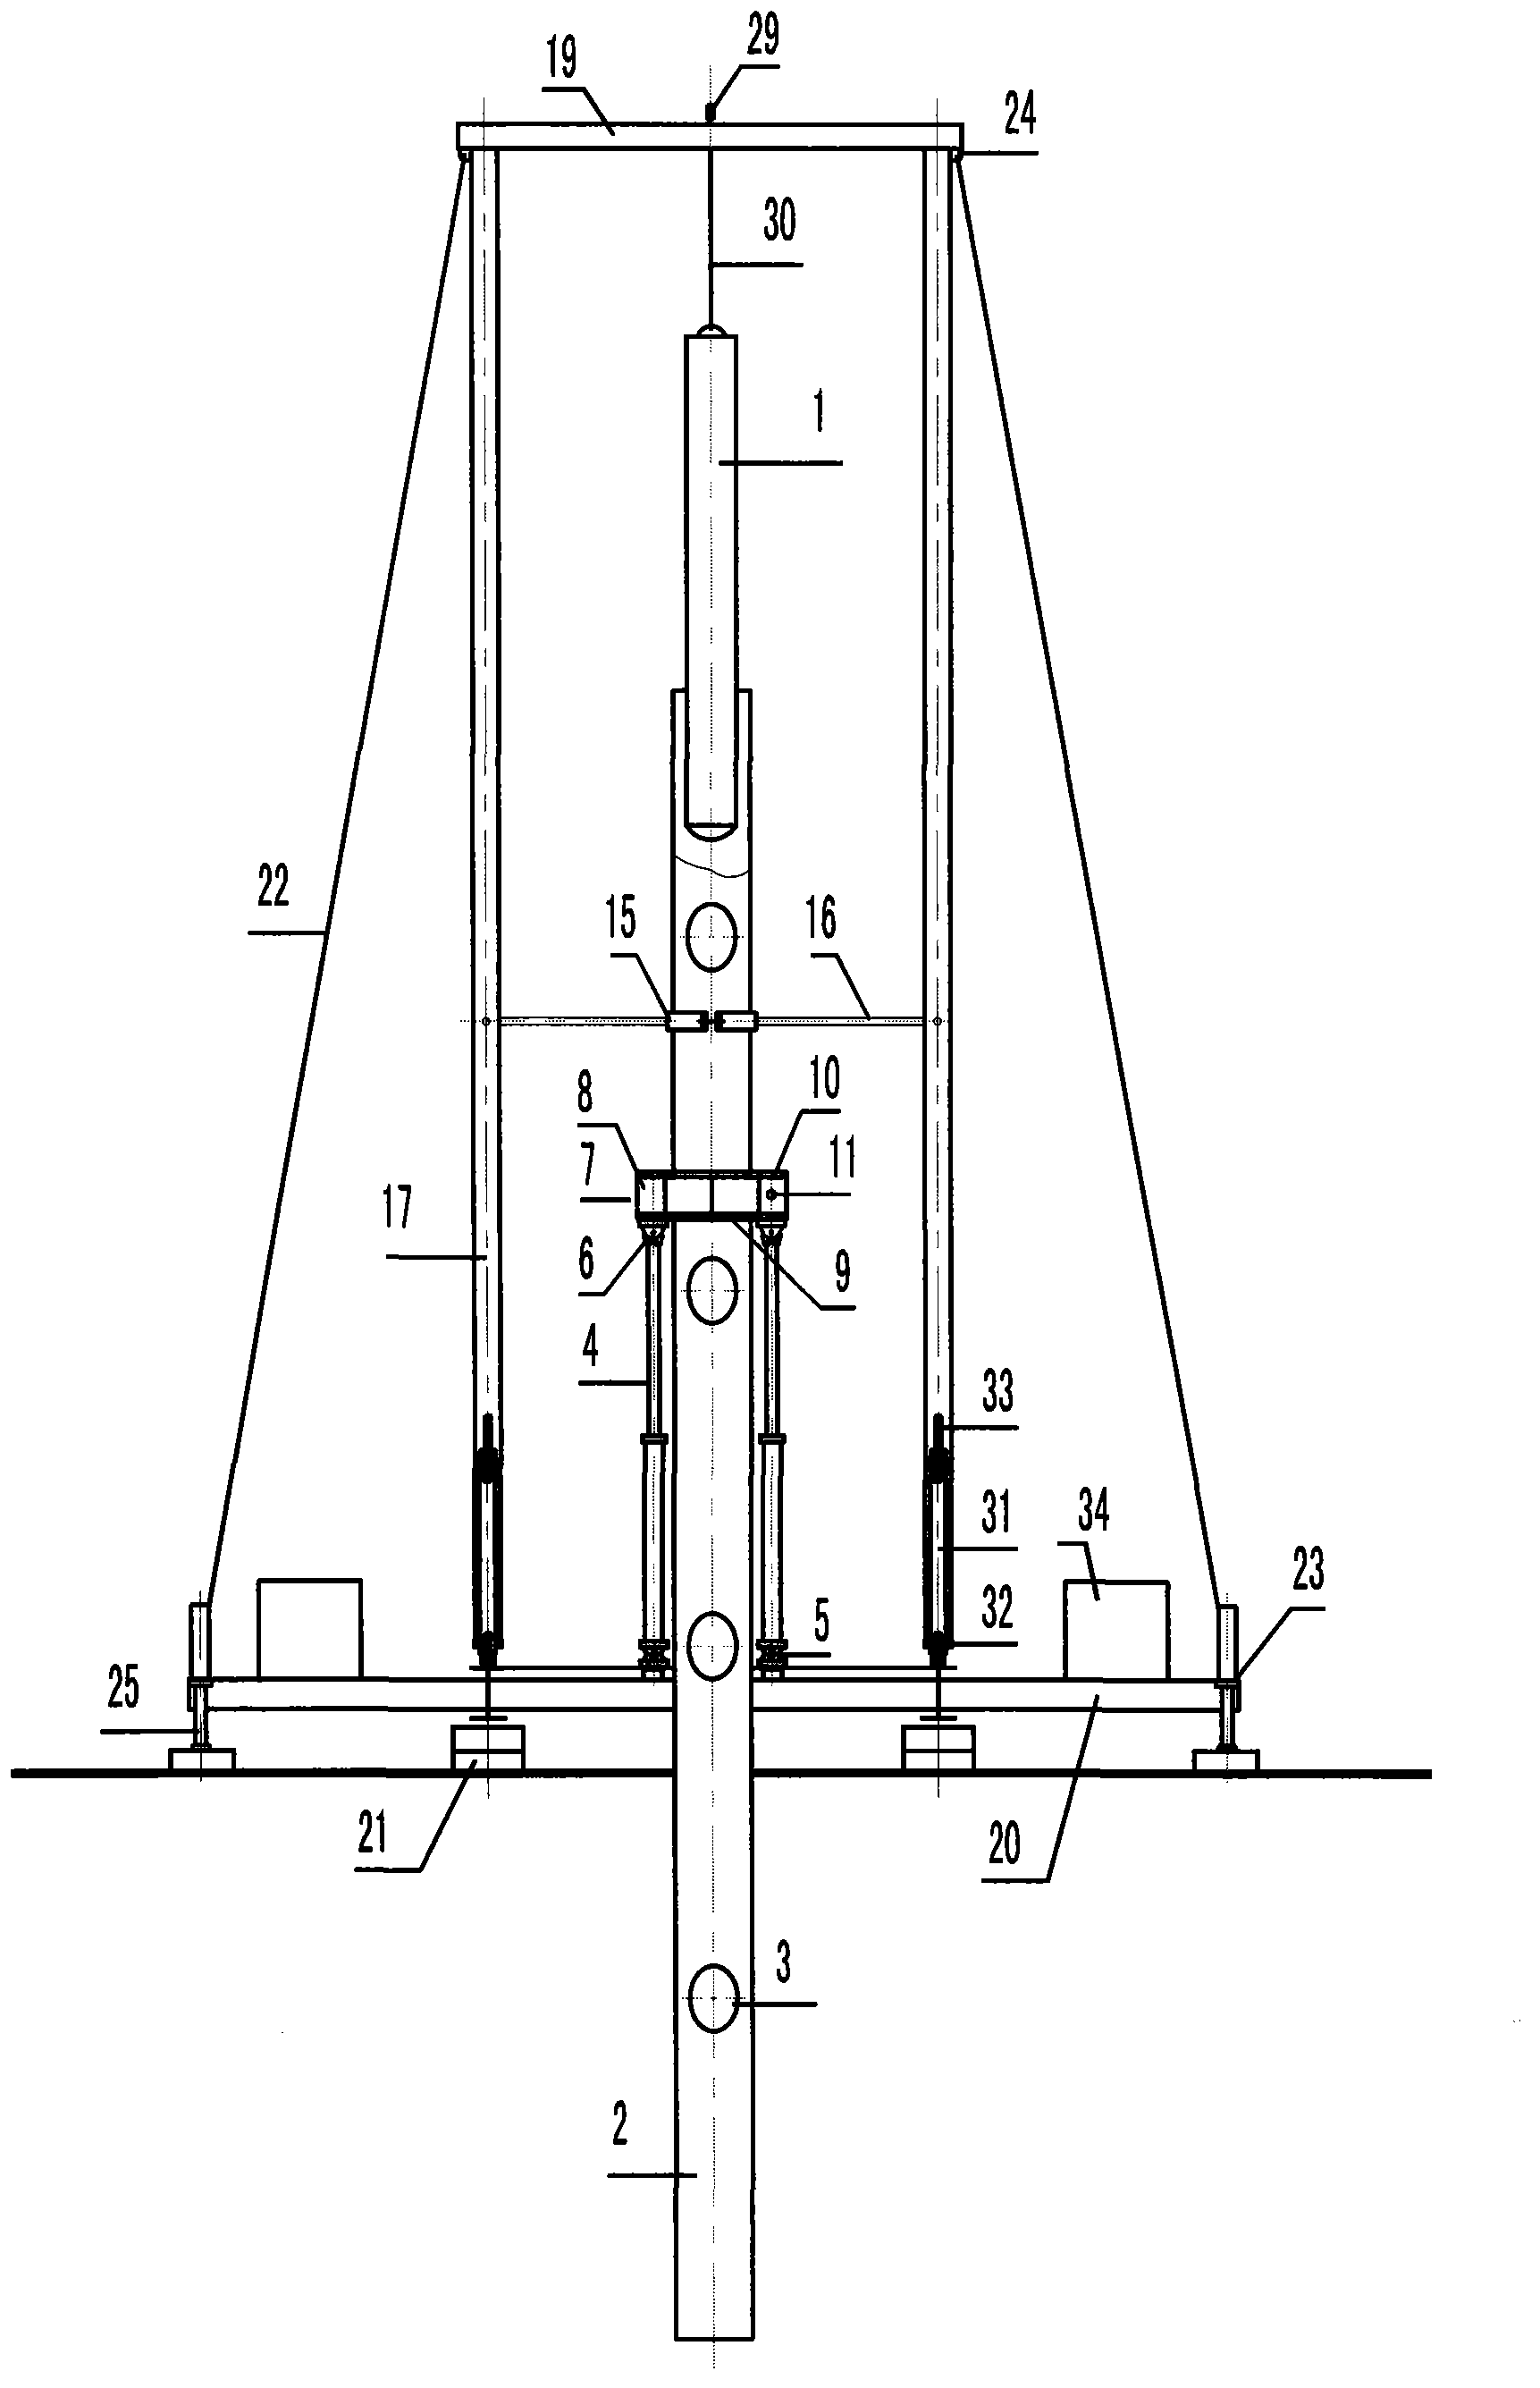 Pile-forming construction equipment for composite foundation piles